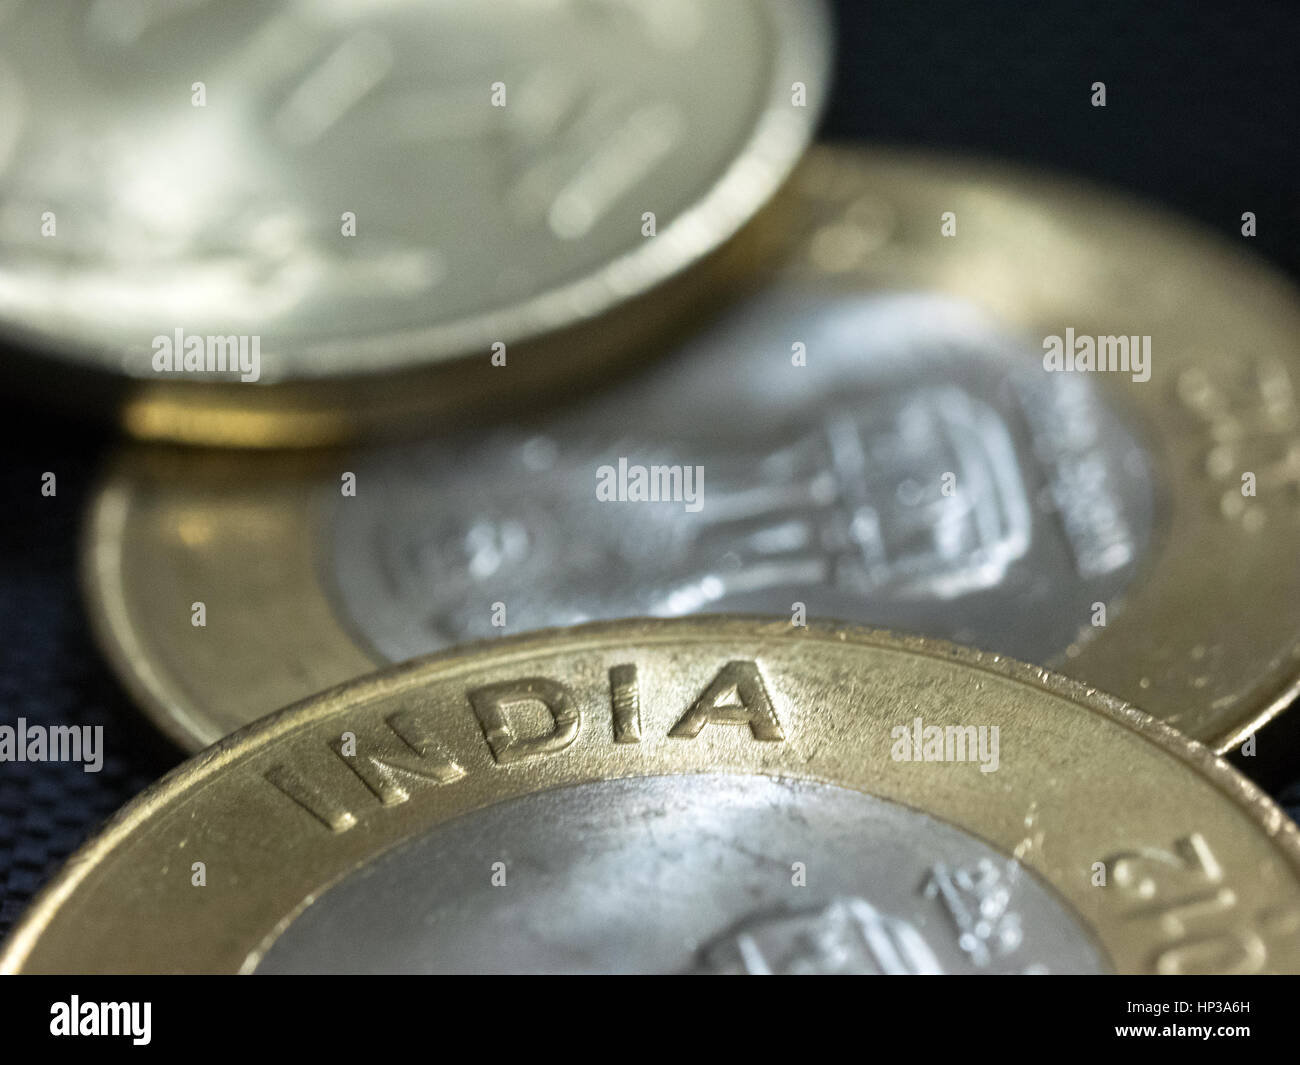 Close-up pictures of Indian currency coins showing details, yellow and white metal Stock Photo